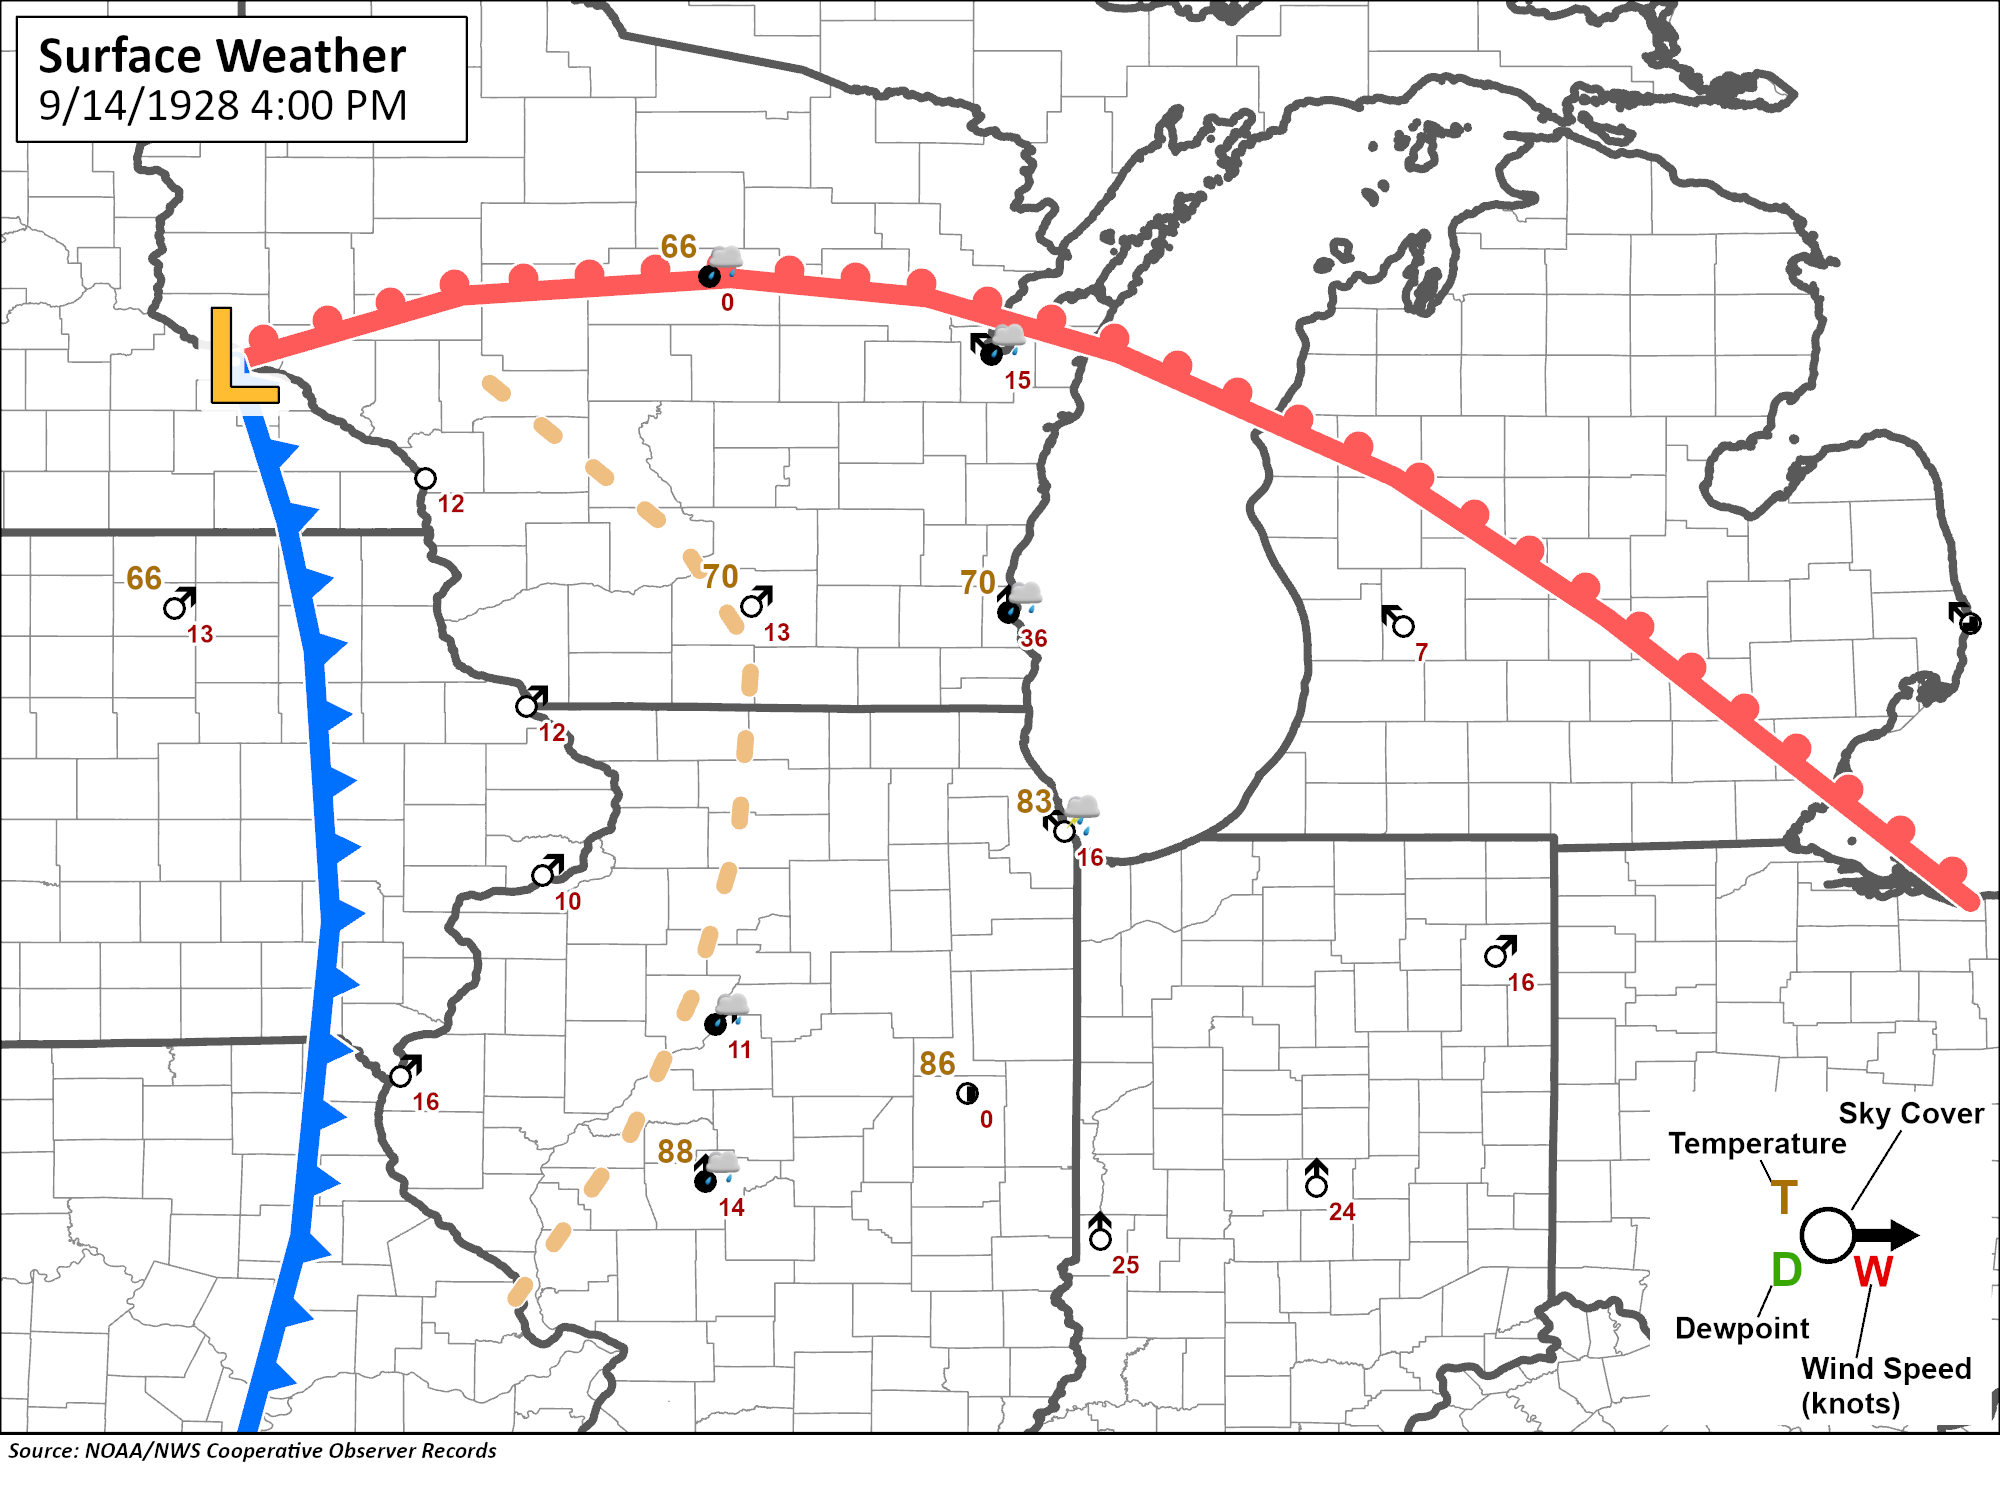 Map showing surface weather features on September 14, 1928 in the Midwest United States. A low pressure area is located in southeastern Minnesota near the Mississippi River. A warm front is depicted east through Wisconsin into southern Michigan and a cold front depicted south through eastern Iowa and eastern Missouri. A dry line or outflow boundary is depicted moving into northwestern Illinois.